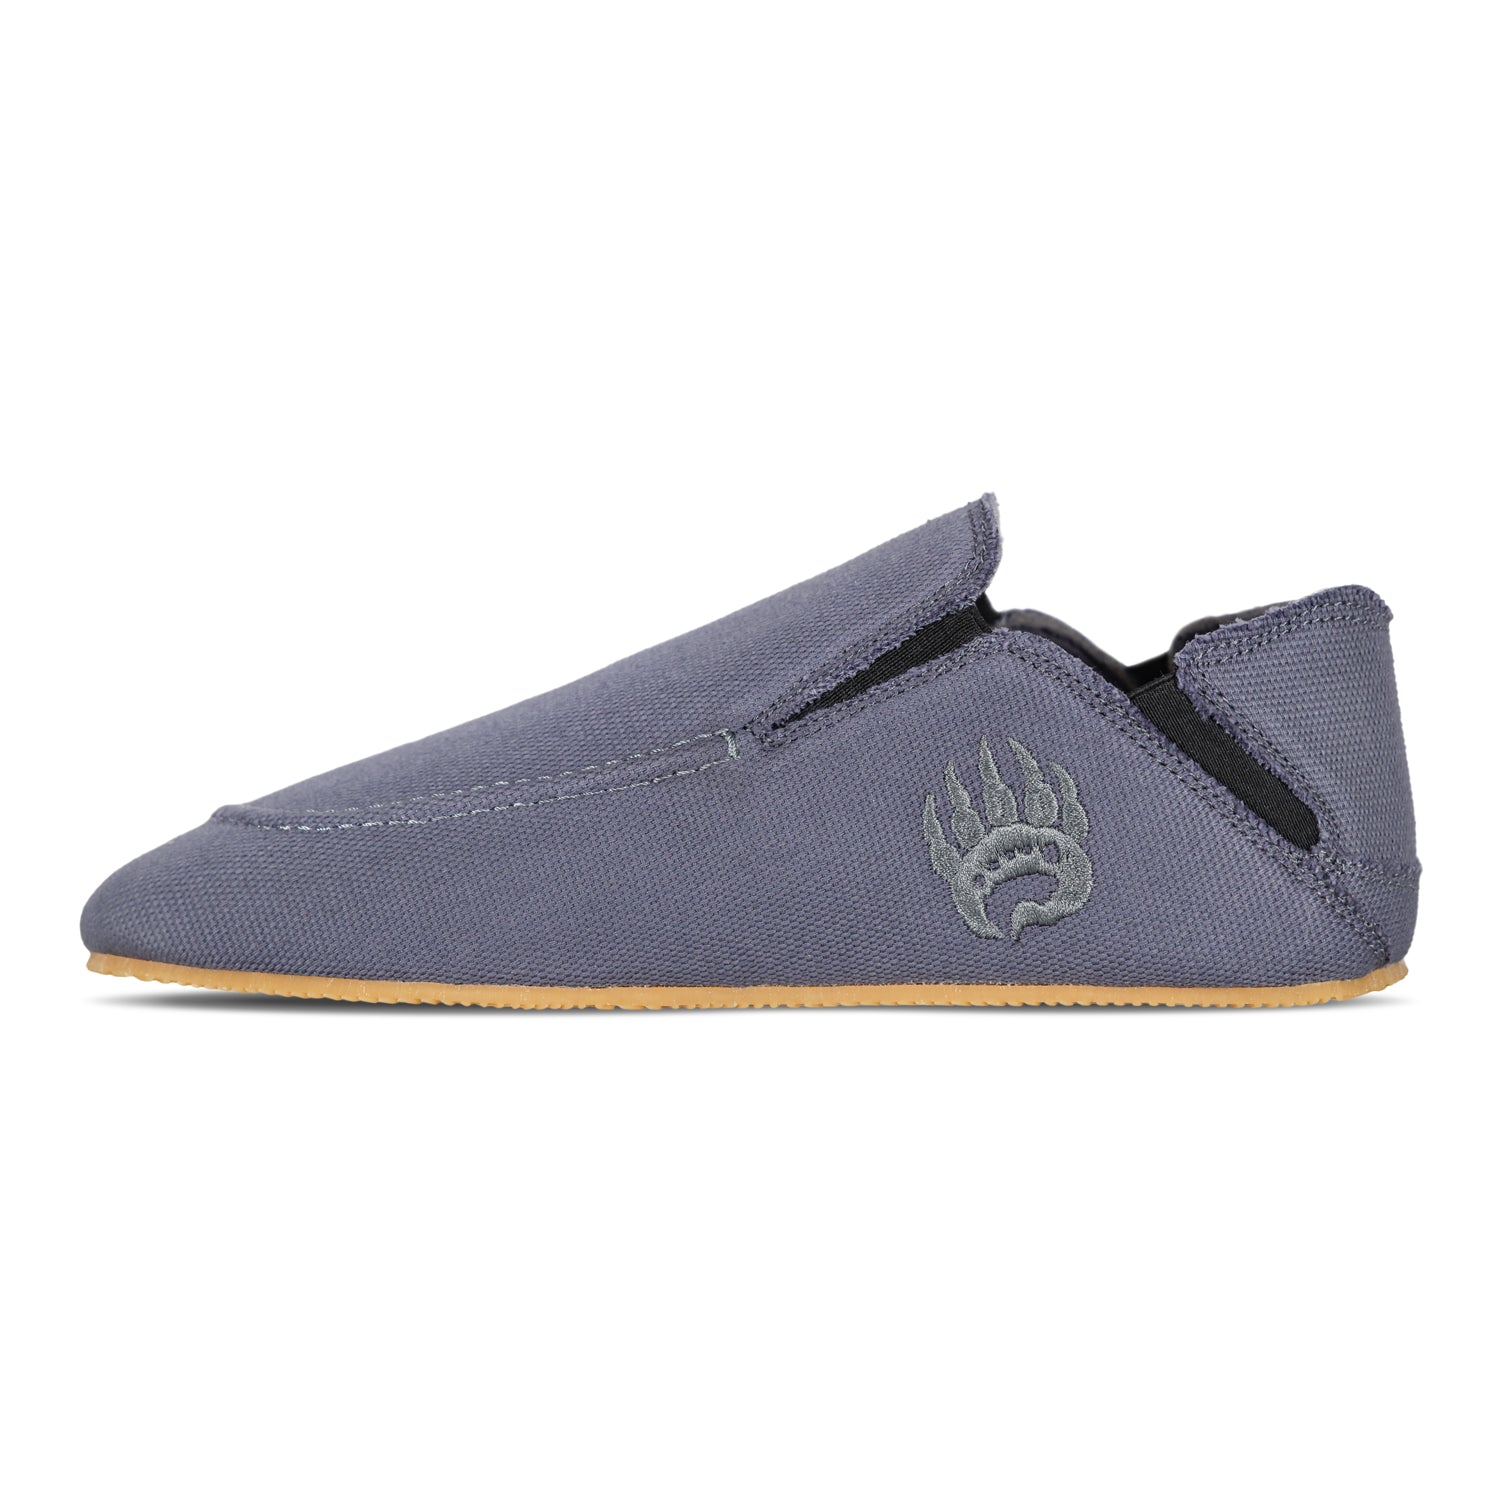 A single, gray Bearfoot Oso Canvas casual shoe featuring a slip-on design with a rubber sole and an embroidered bear paw logo on the upper side. The shoe has a stretchable band at the opening for better comfort.